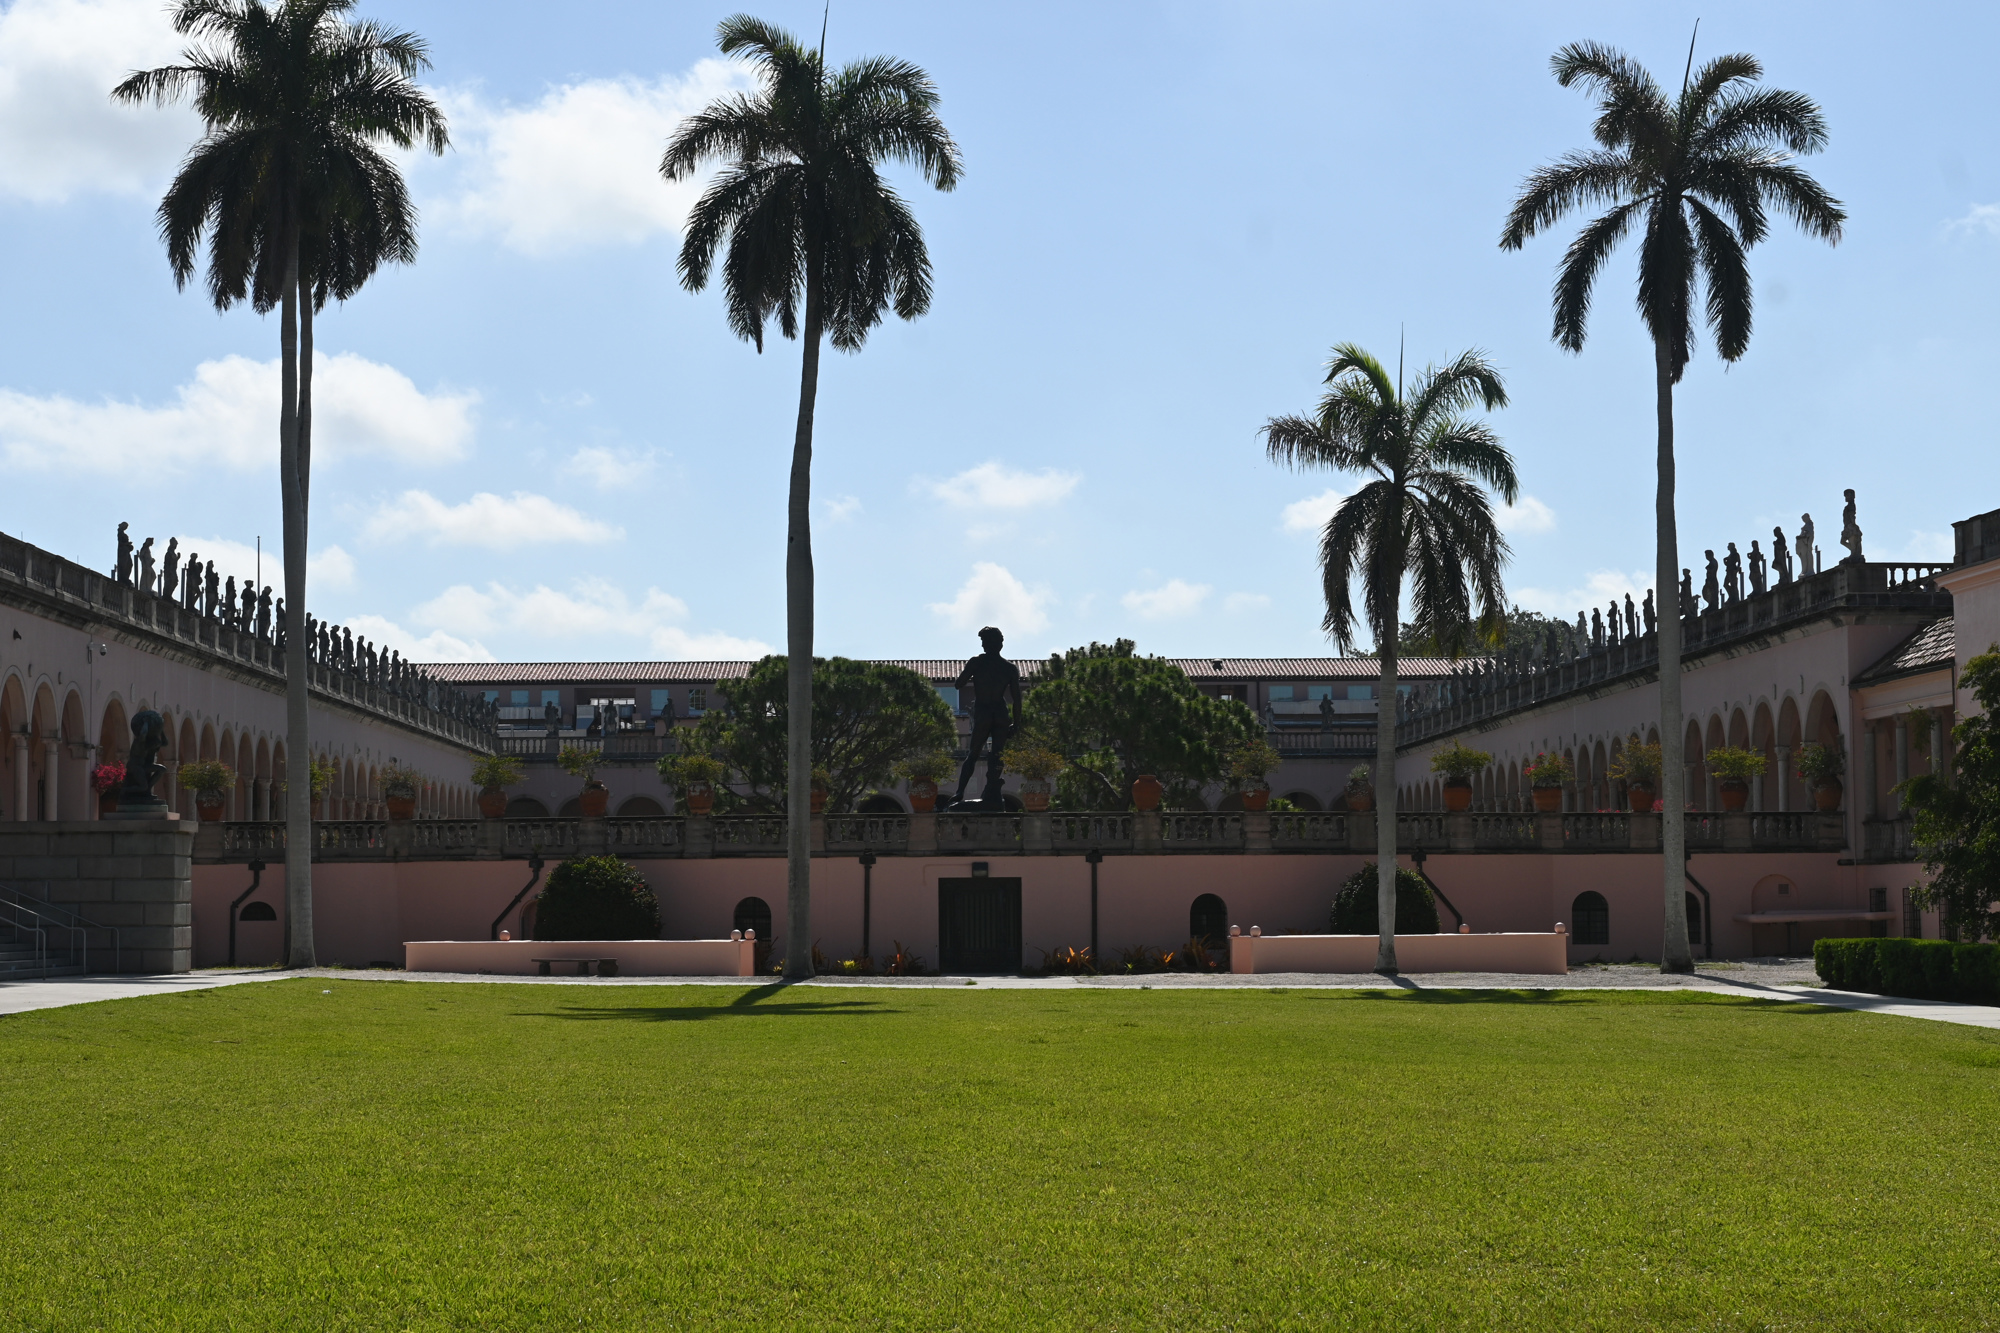 The natural beauty of the Ringling's spacious backdrop will serve as setting for the student photography exhibit. (Photo: Spencer Fordin)